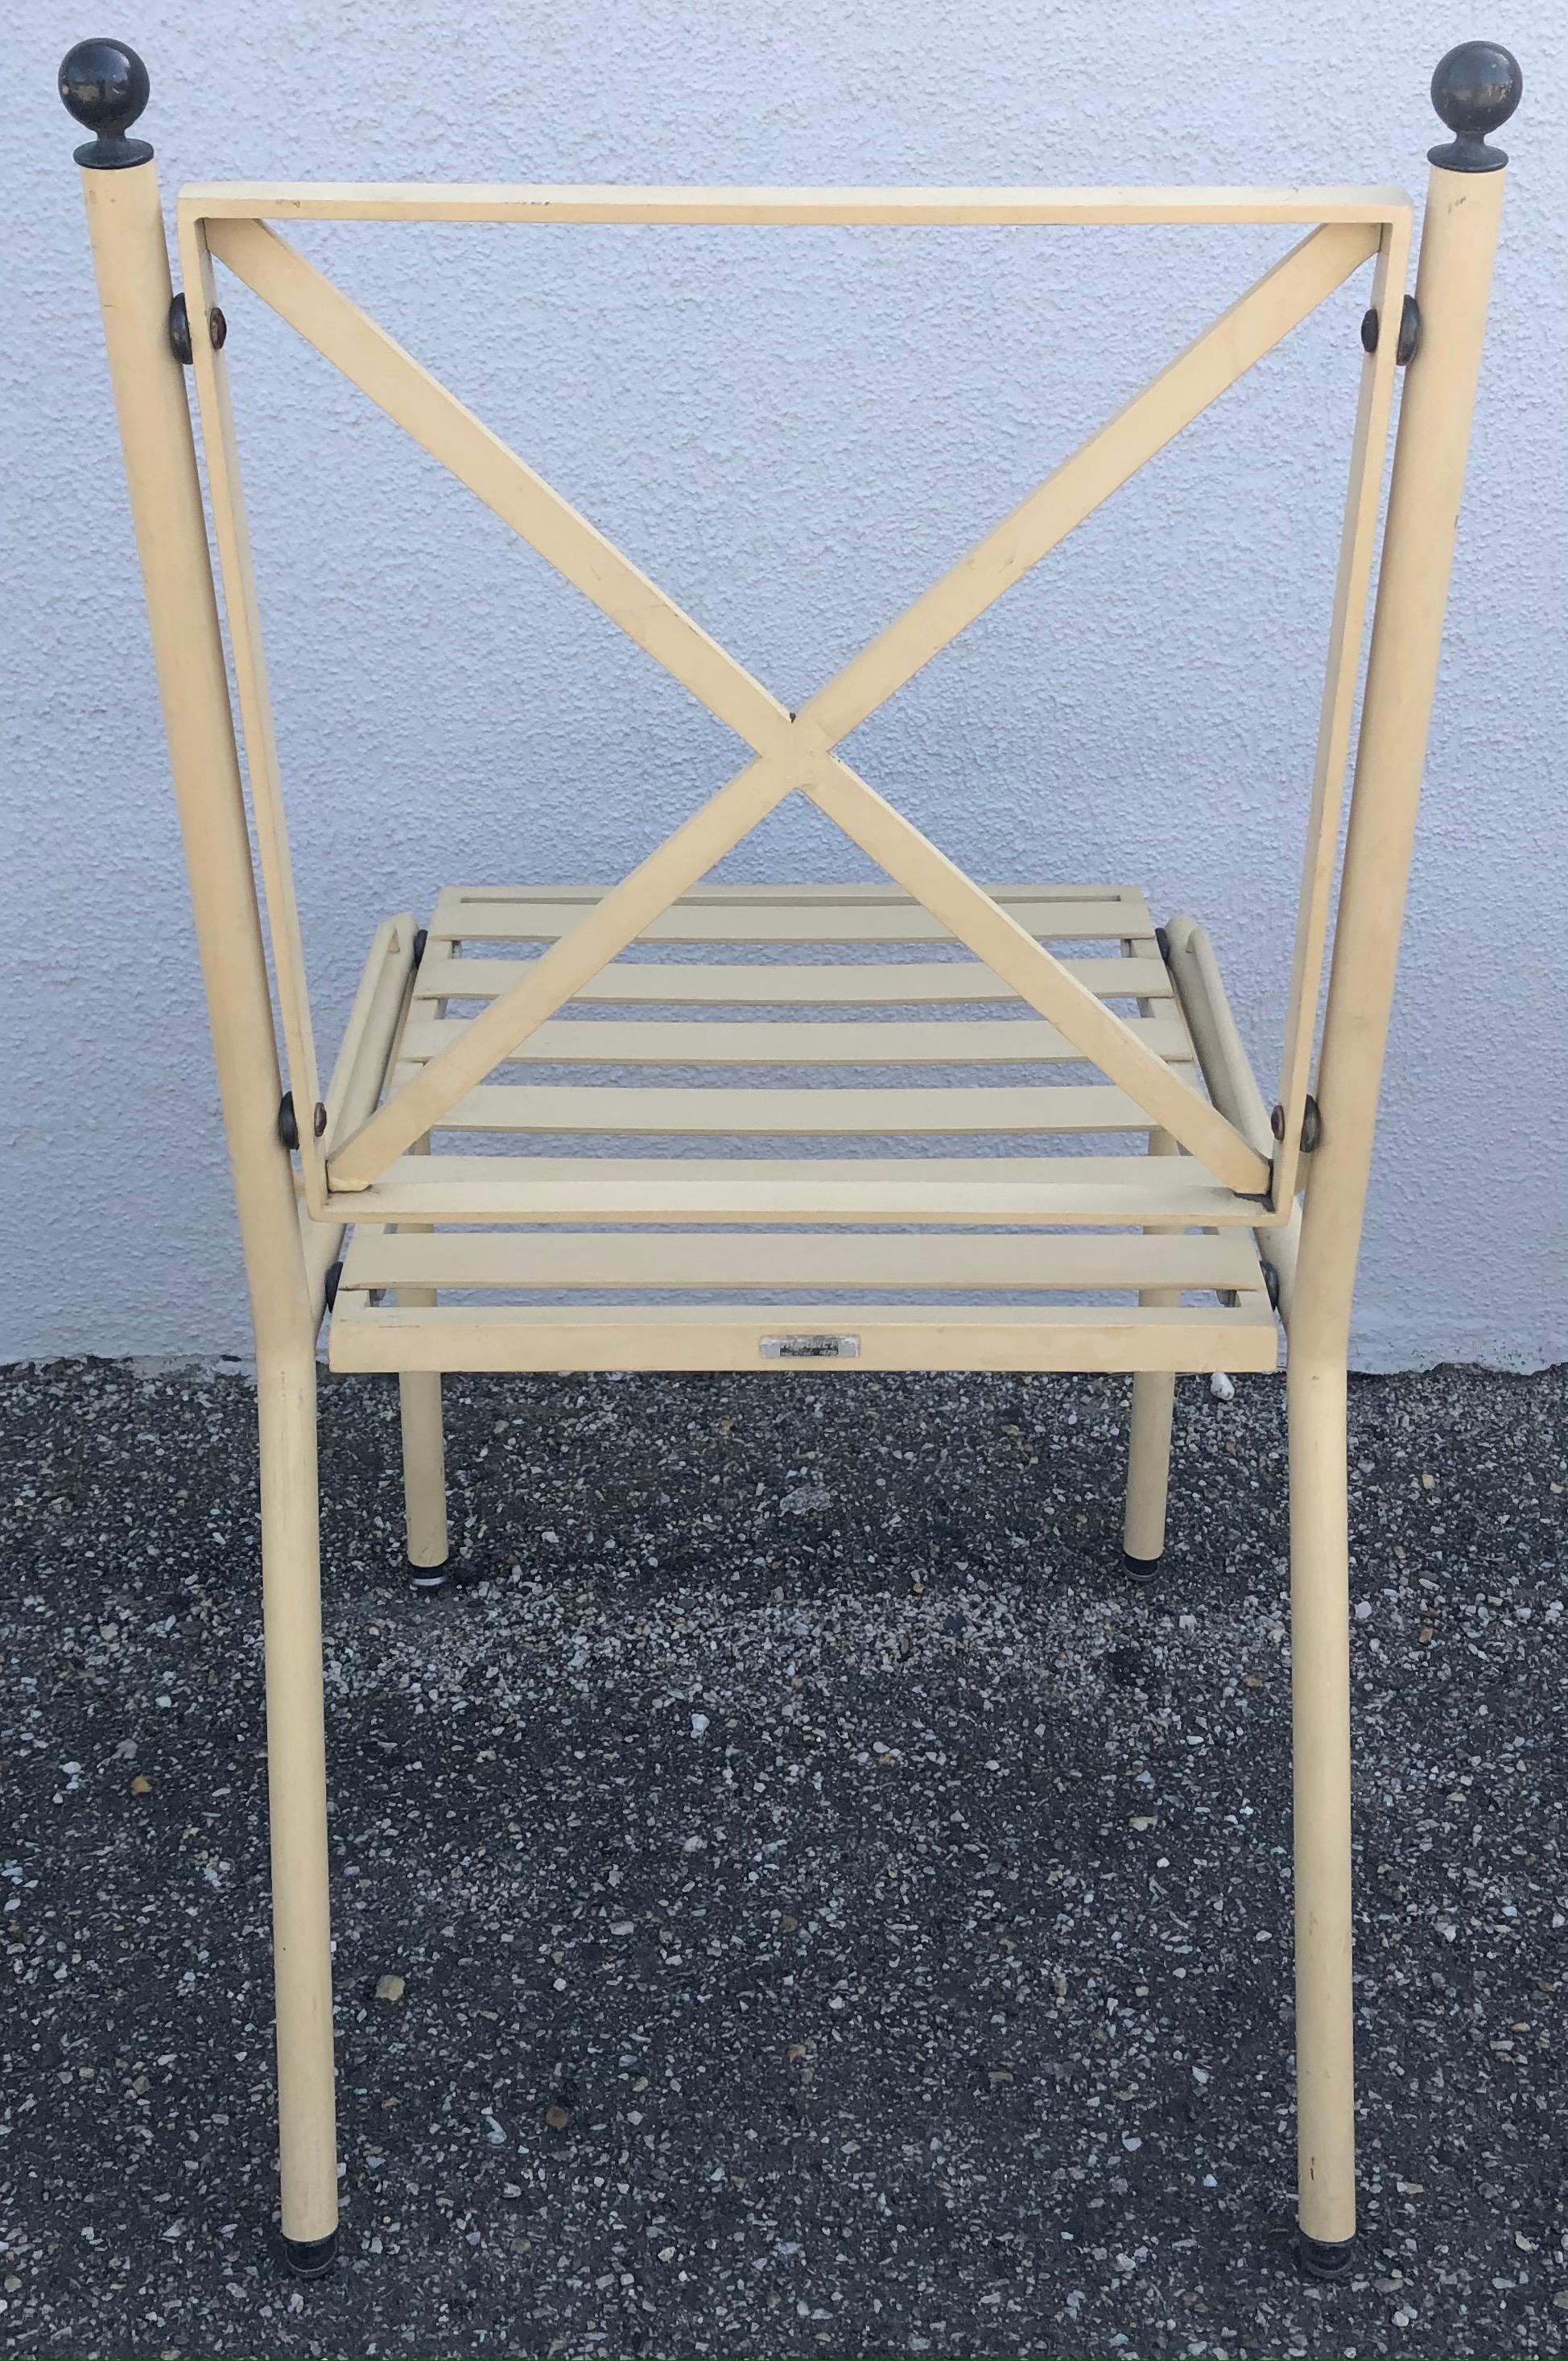 Painted Set of 8 French Maison Hugonet Aluminum Garden Chairs Warm Beige